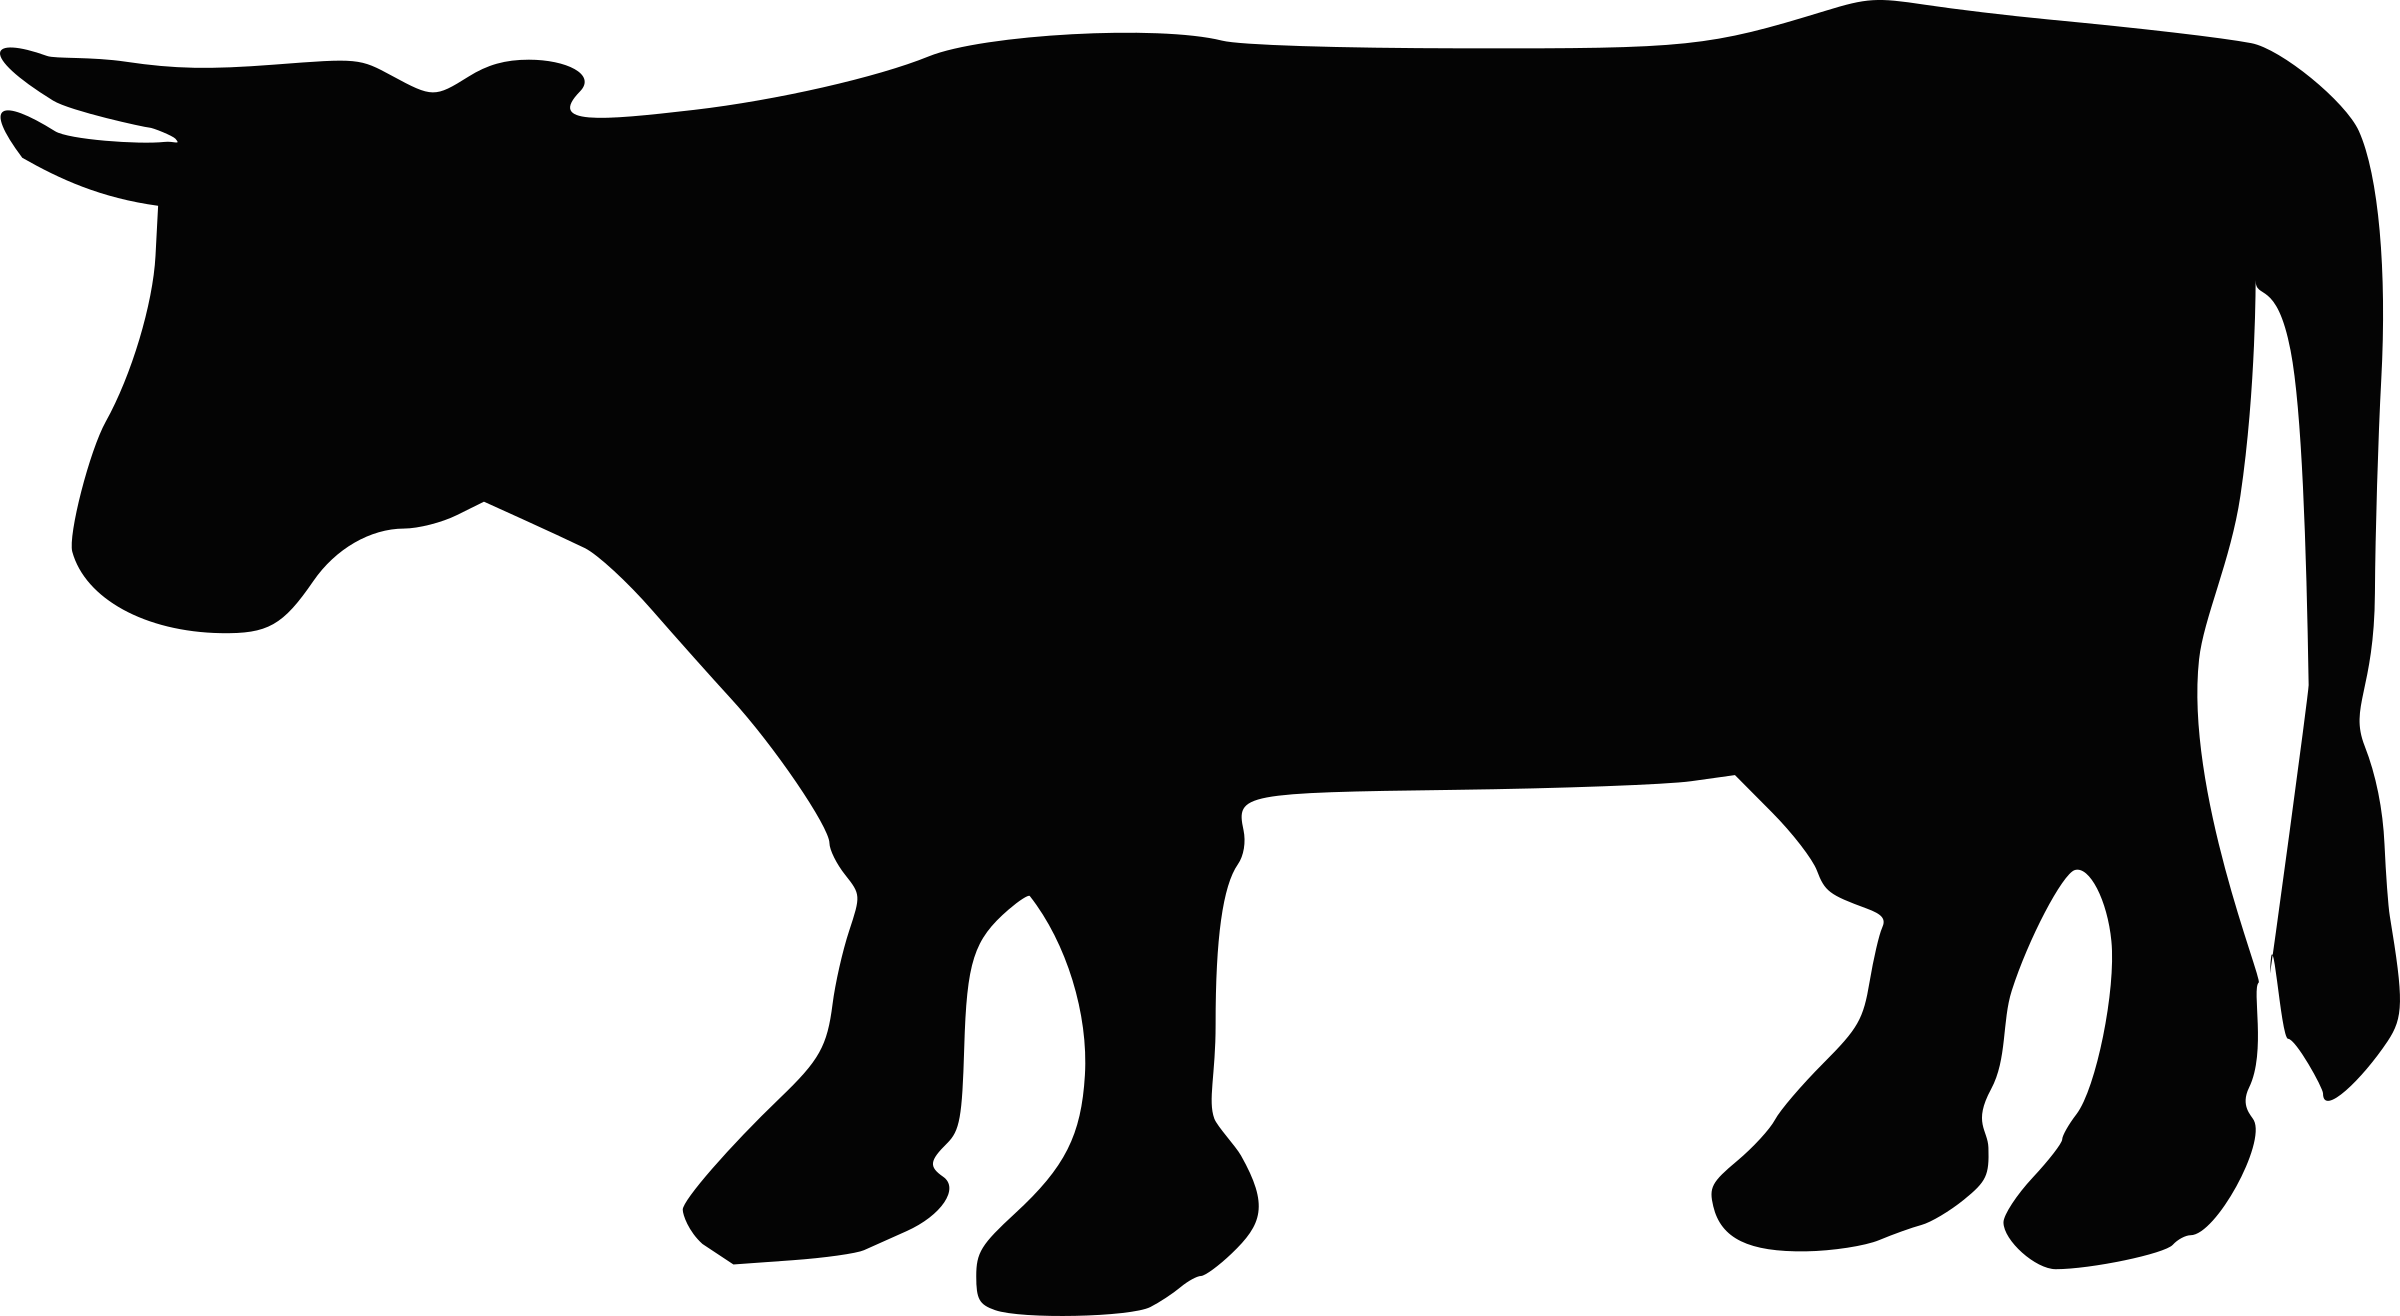 cow silhouette
